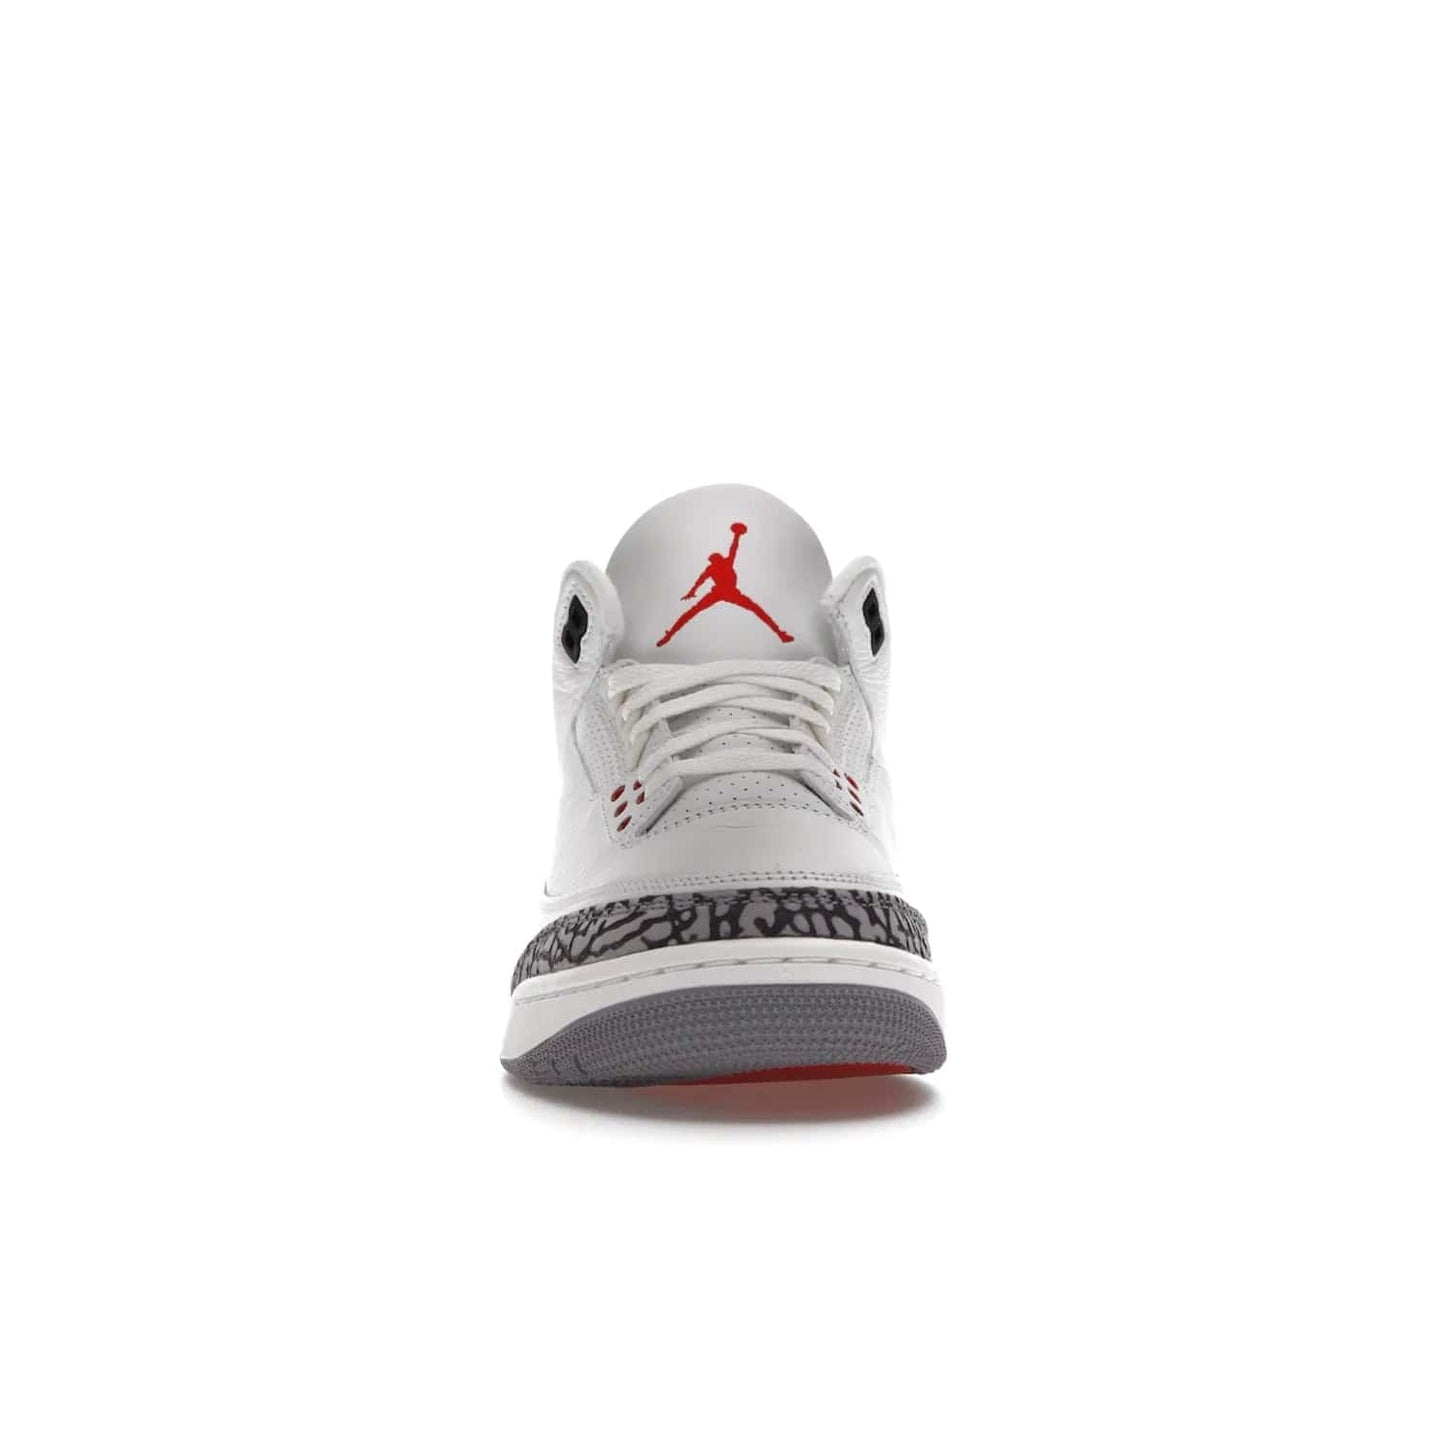 Jordan 3 Retro White Cement Reimagined - Image 10 - Only at www.BallersClubKickz.com - The Reimagined Air Jordan 3 Retro in a Summit White/Fire Red/Black/Cement Grey colorway is launching on March 11, 2023. Featuring a white leather upper, off-white midsoles and heel tabs, this vintage-look sneaker is a must-have.